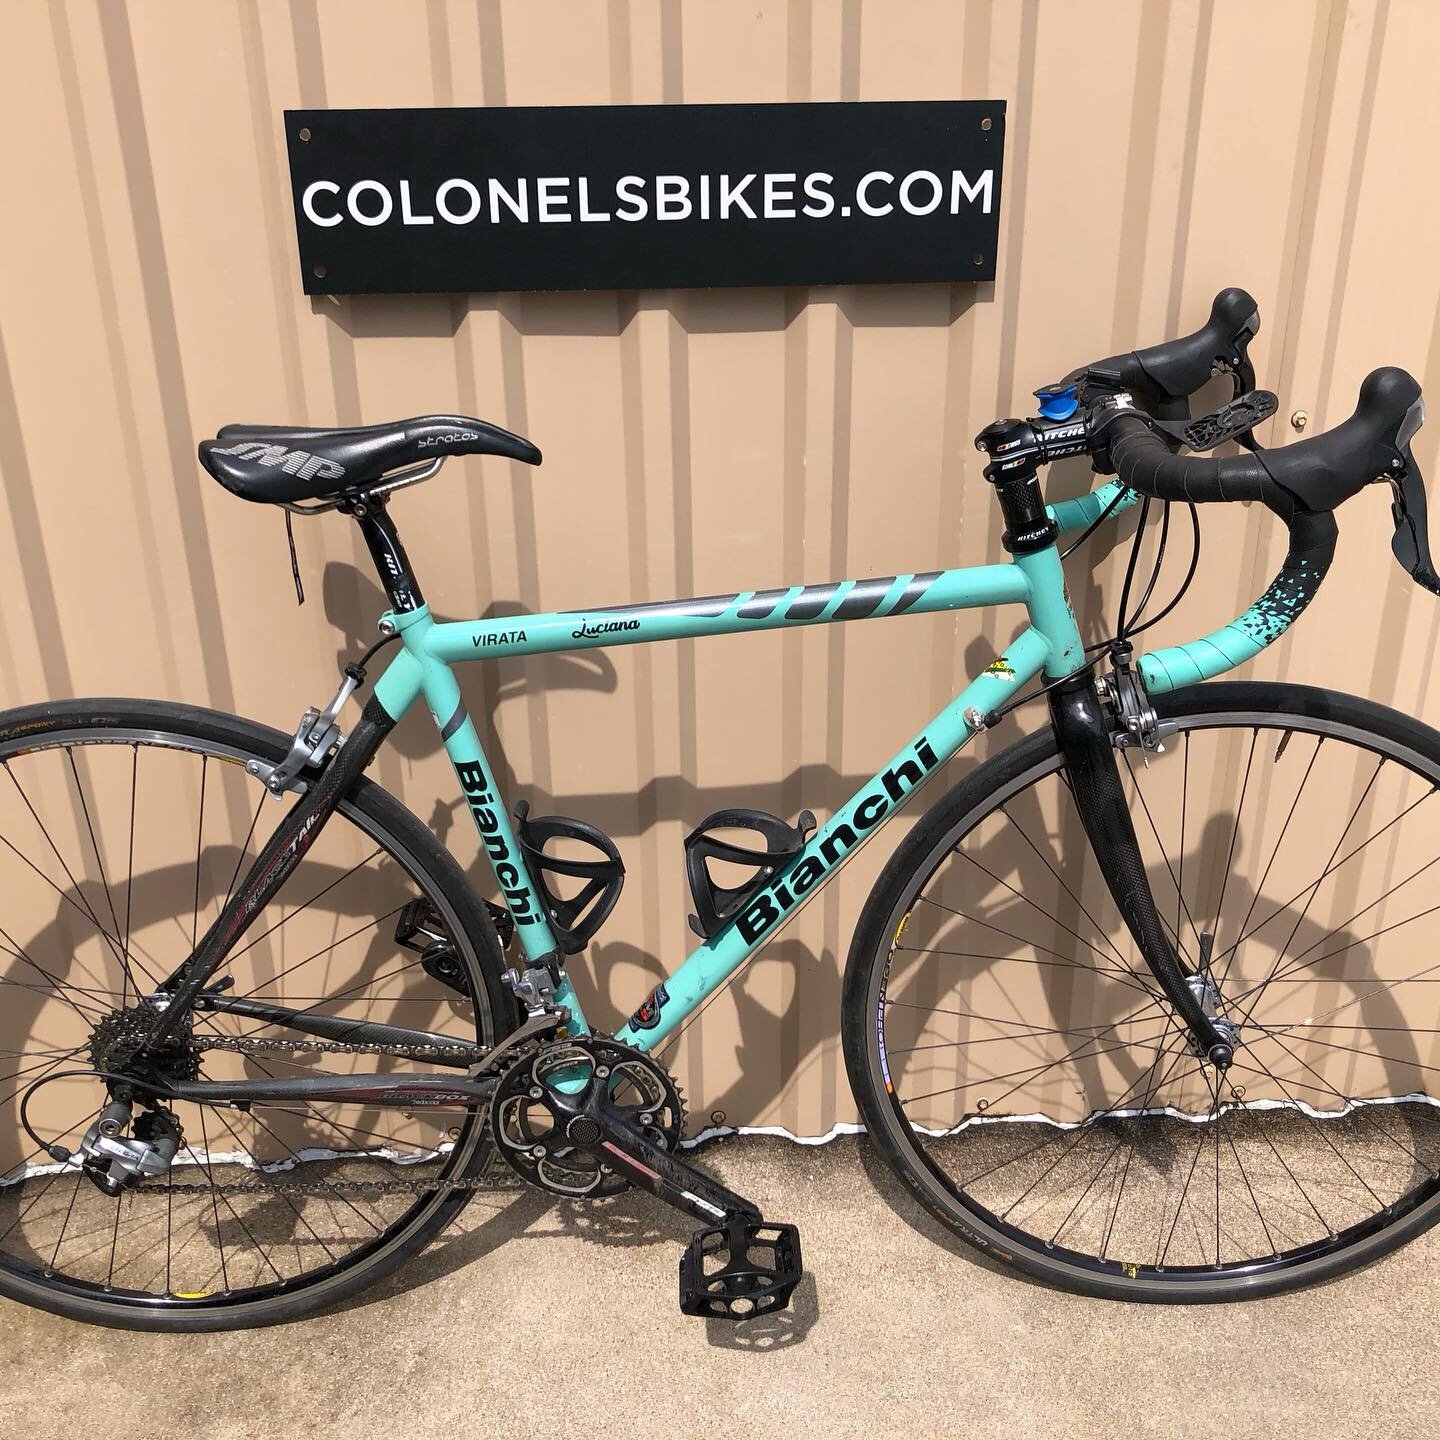 We have a nice selection of pre-owned road bikes in stock at priced that won&rsquo;t break the bank. $489.99 to $850. #colonelsbikes #usedbikesdallasfortworth (817)924-1333